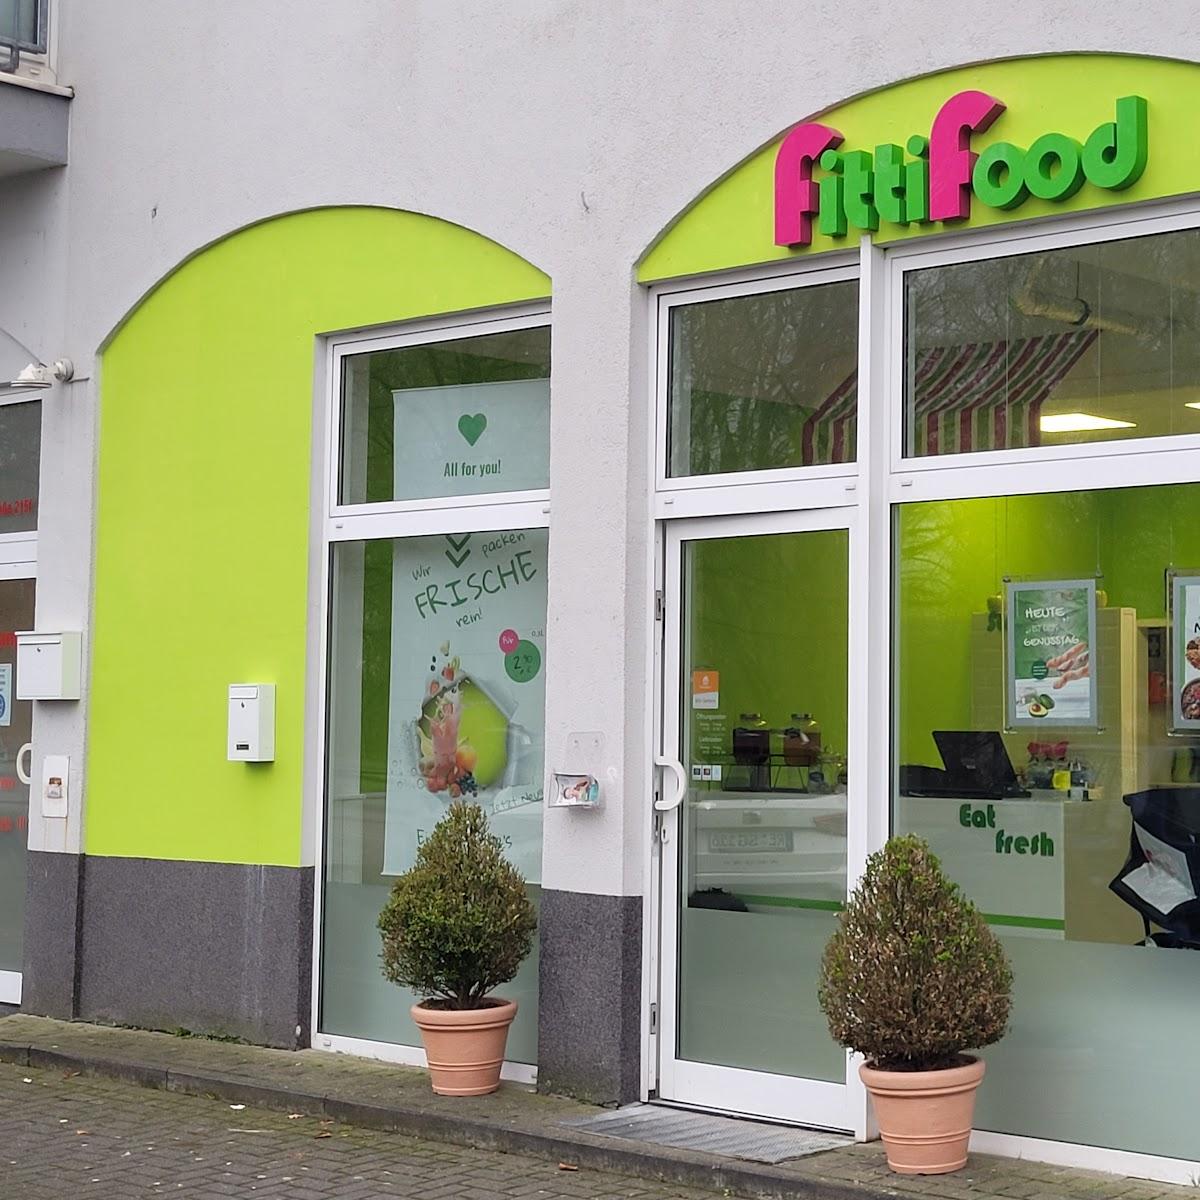 Restaurant "fittifood.delivery" in Marl